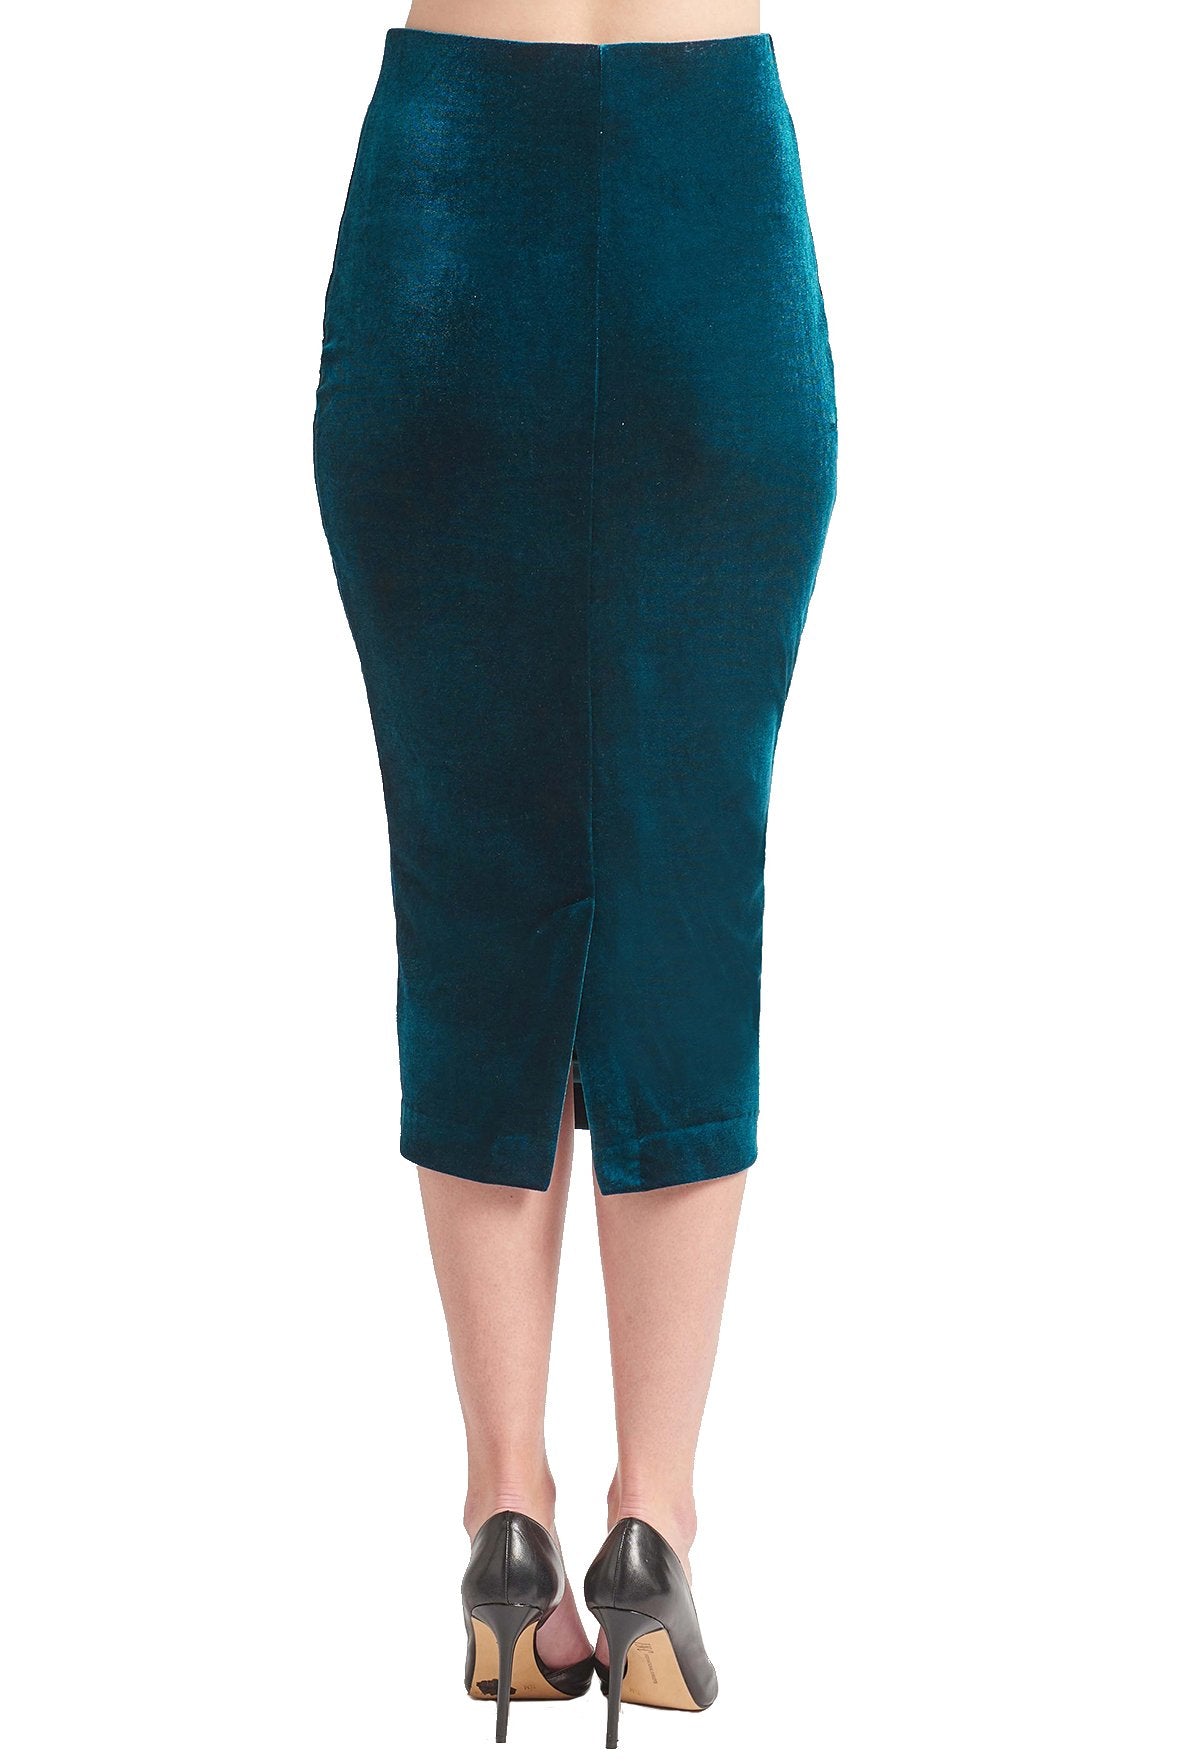 Back view of model wearing teal knit stretch velvet body-con midi pencil skirt with back bottom slit.